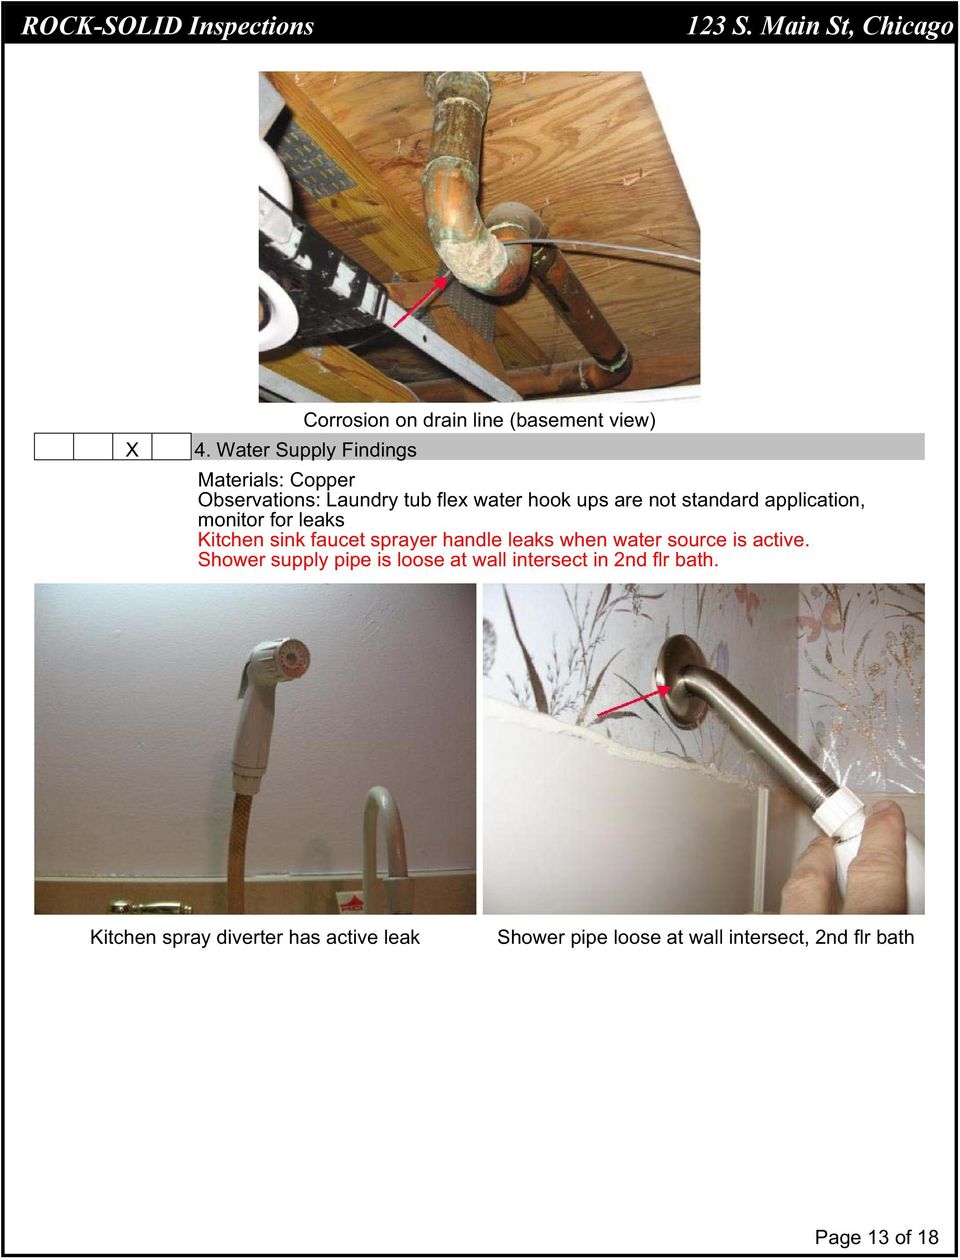 application, monitor for leaks Kitchen sink faucet sprayer handle leaks when water source is active.